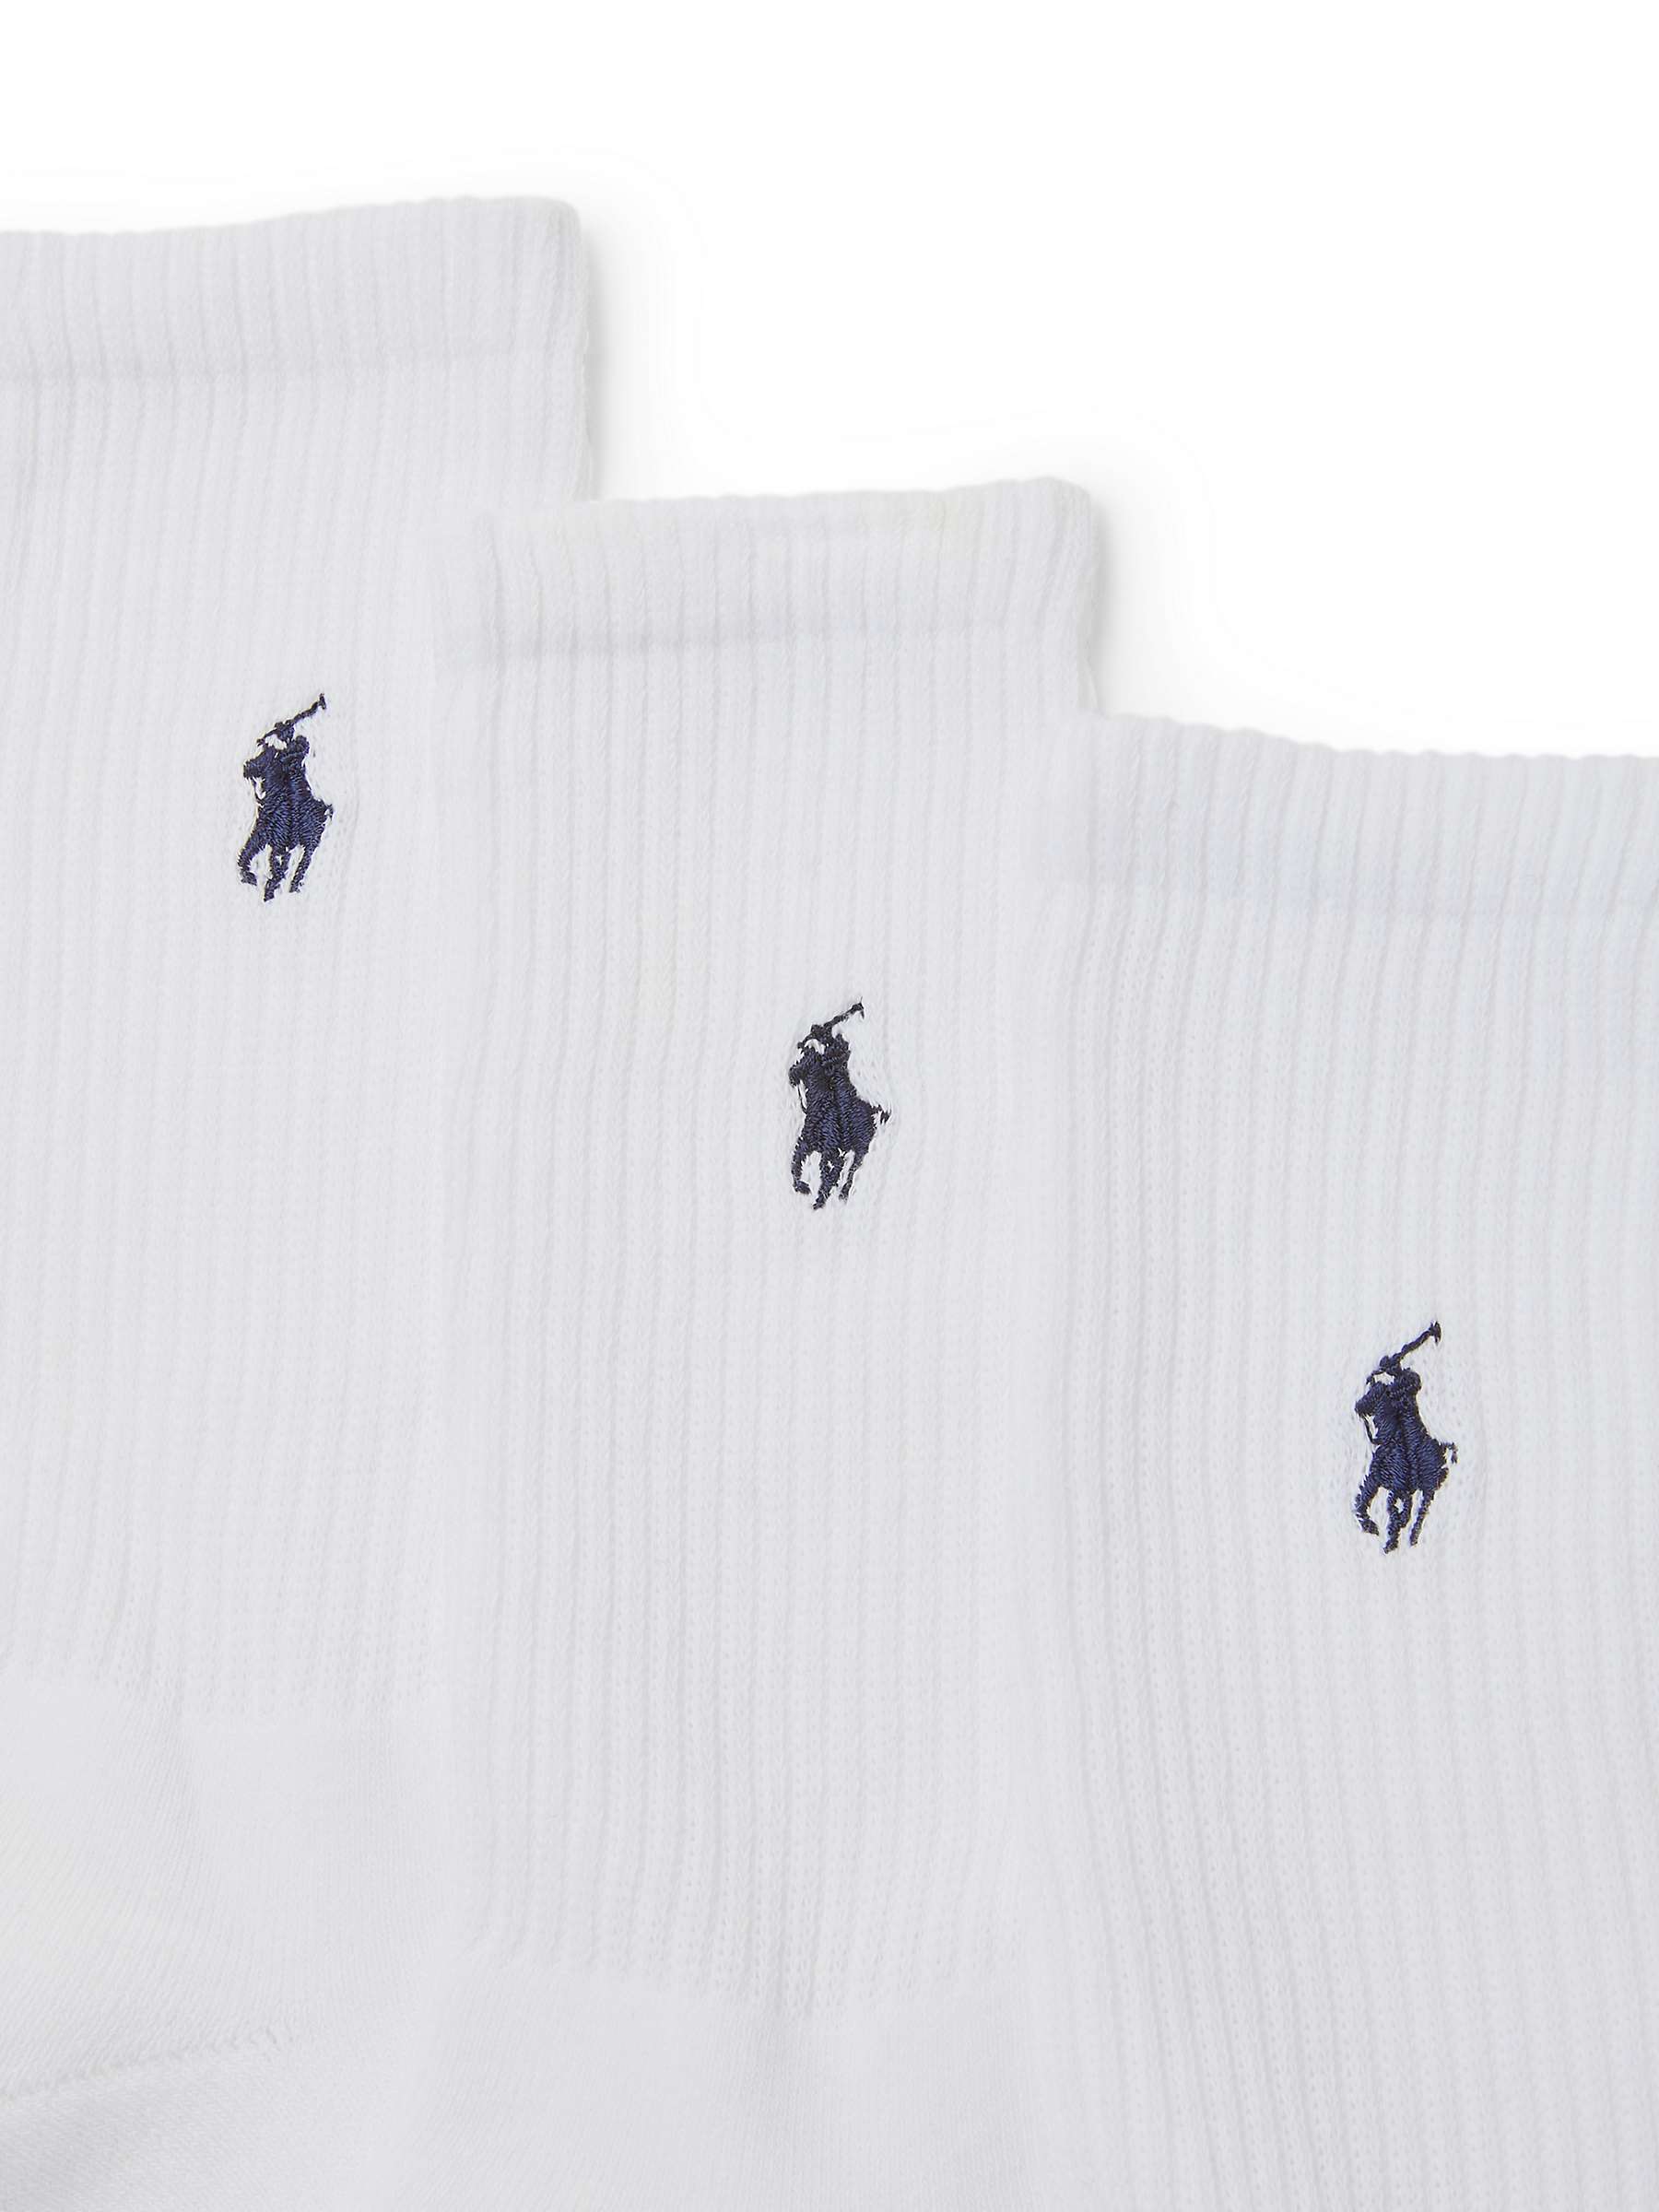 Buy Polo Ralph Lauren Sports Socks, Pack of 3, One Size, White Online at johnlewis.com